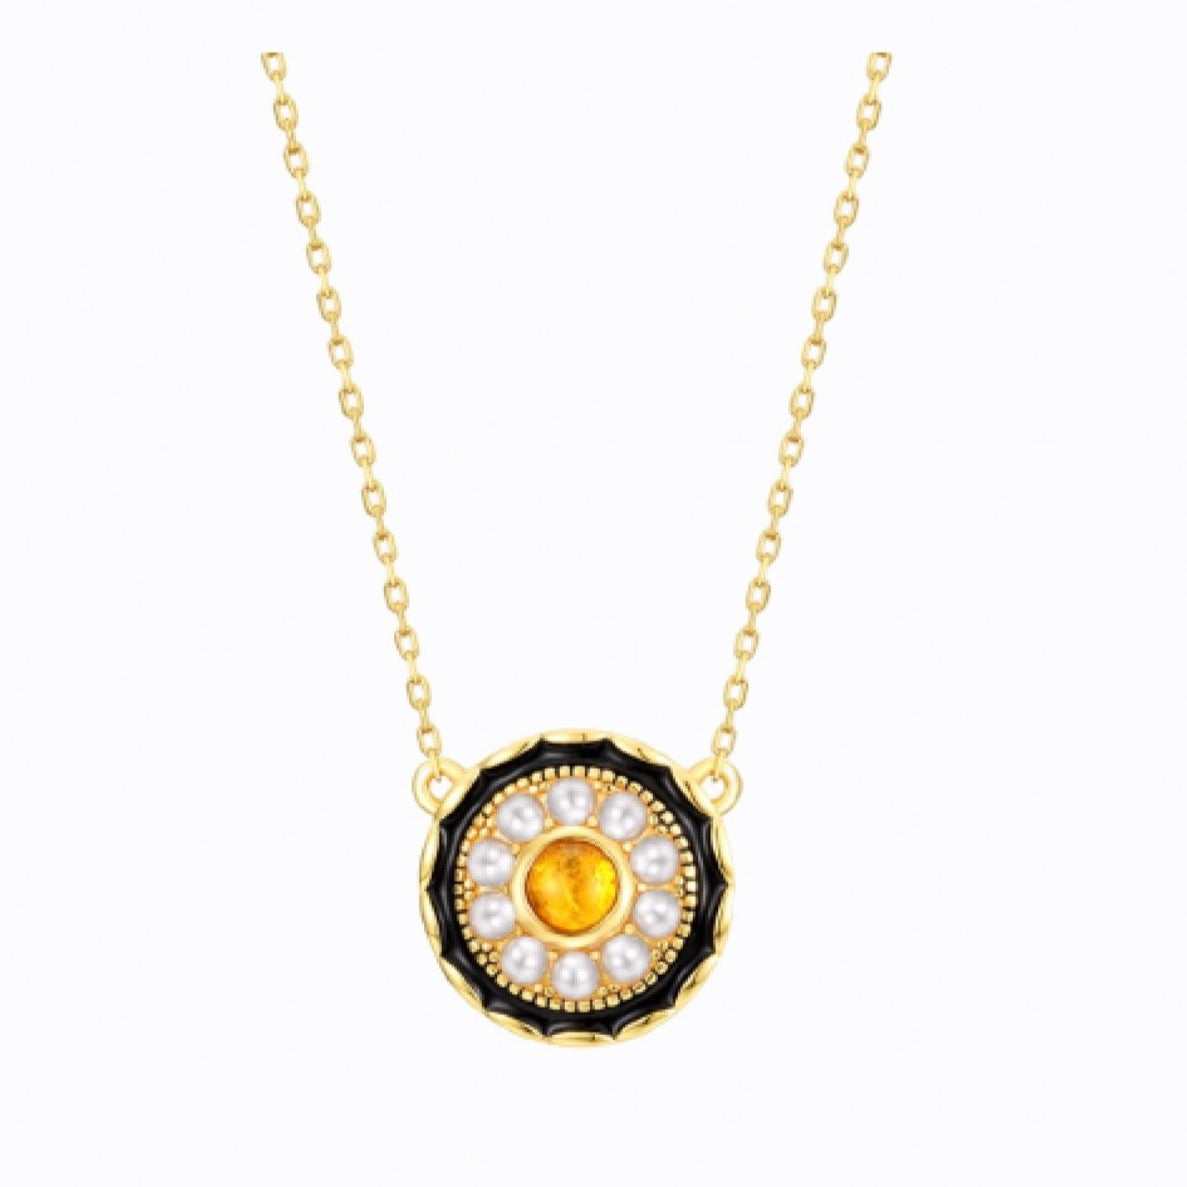 Amber And Shell Pearl Pendant Necklace, 14ct Gold Plate  BY BELLA MAYFORD